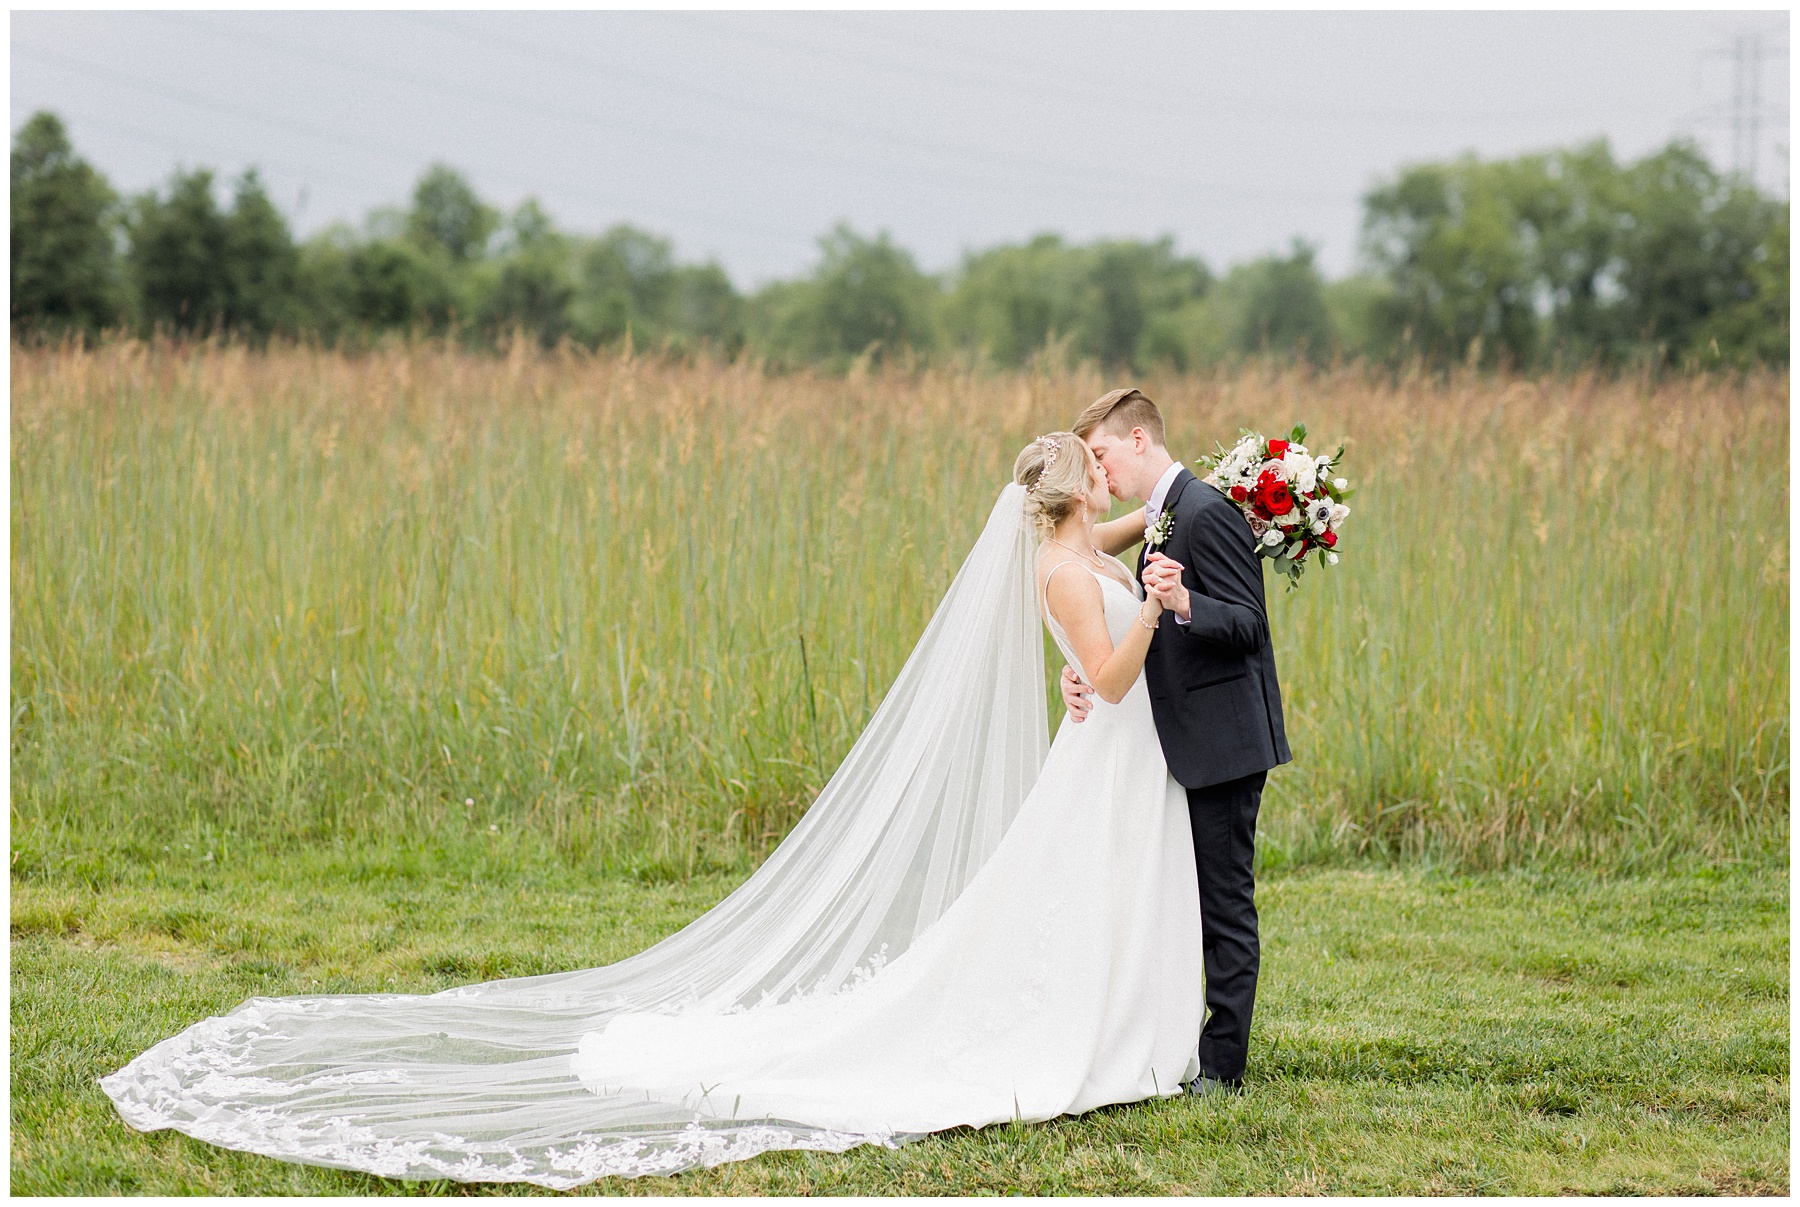 Fall wedding at Brookshire Event Center in Delaware Ohio. Amanda Eloise Photography.